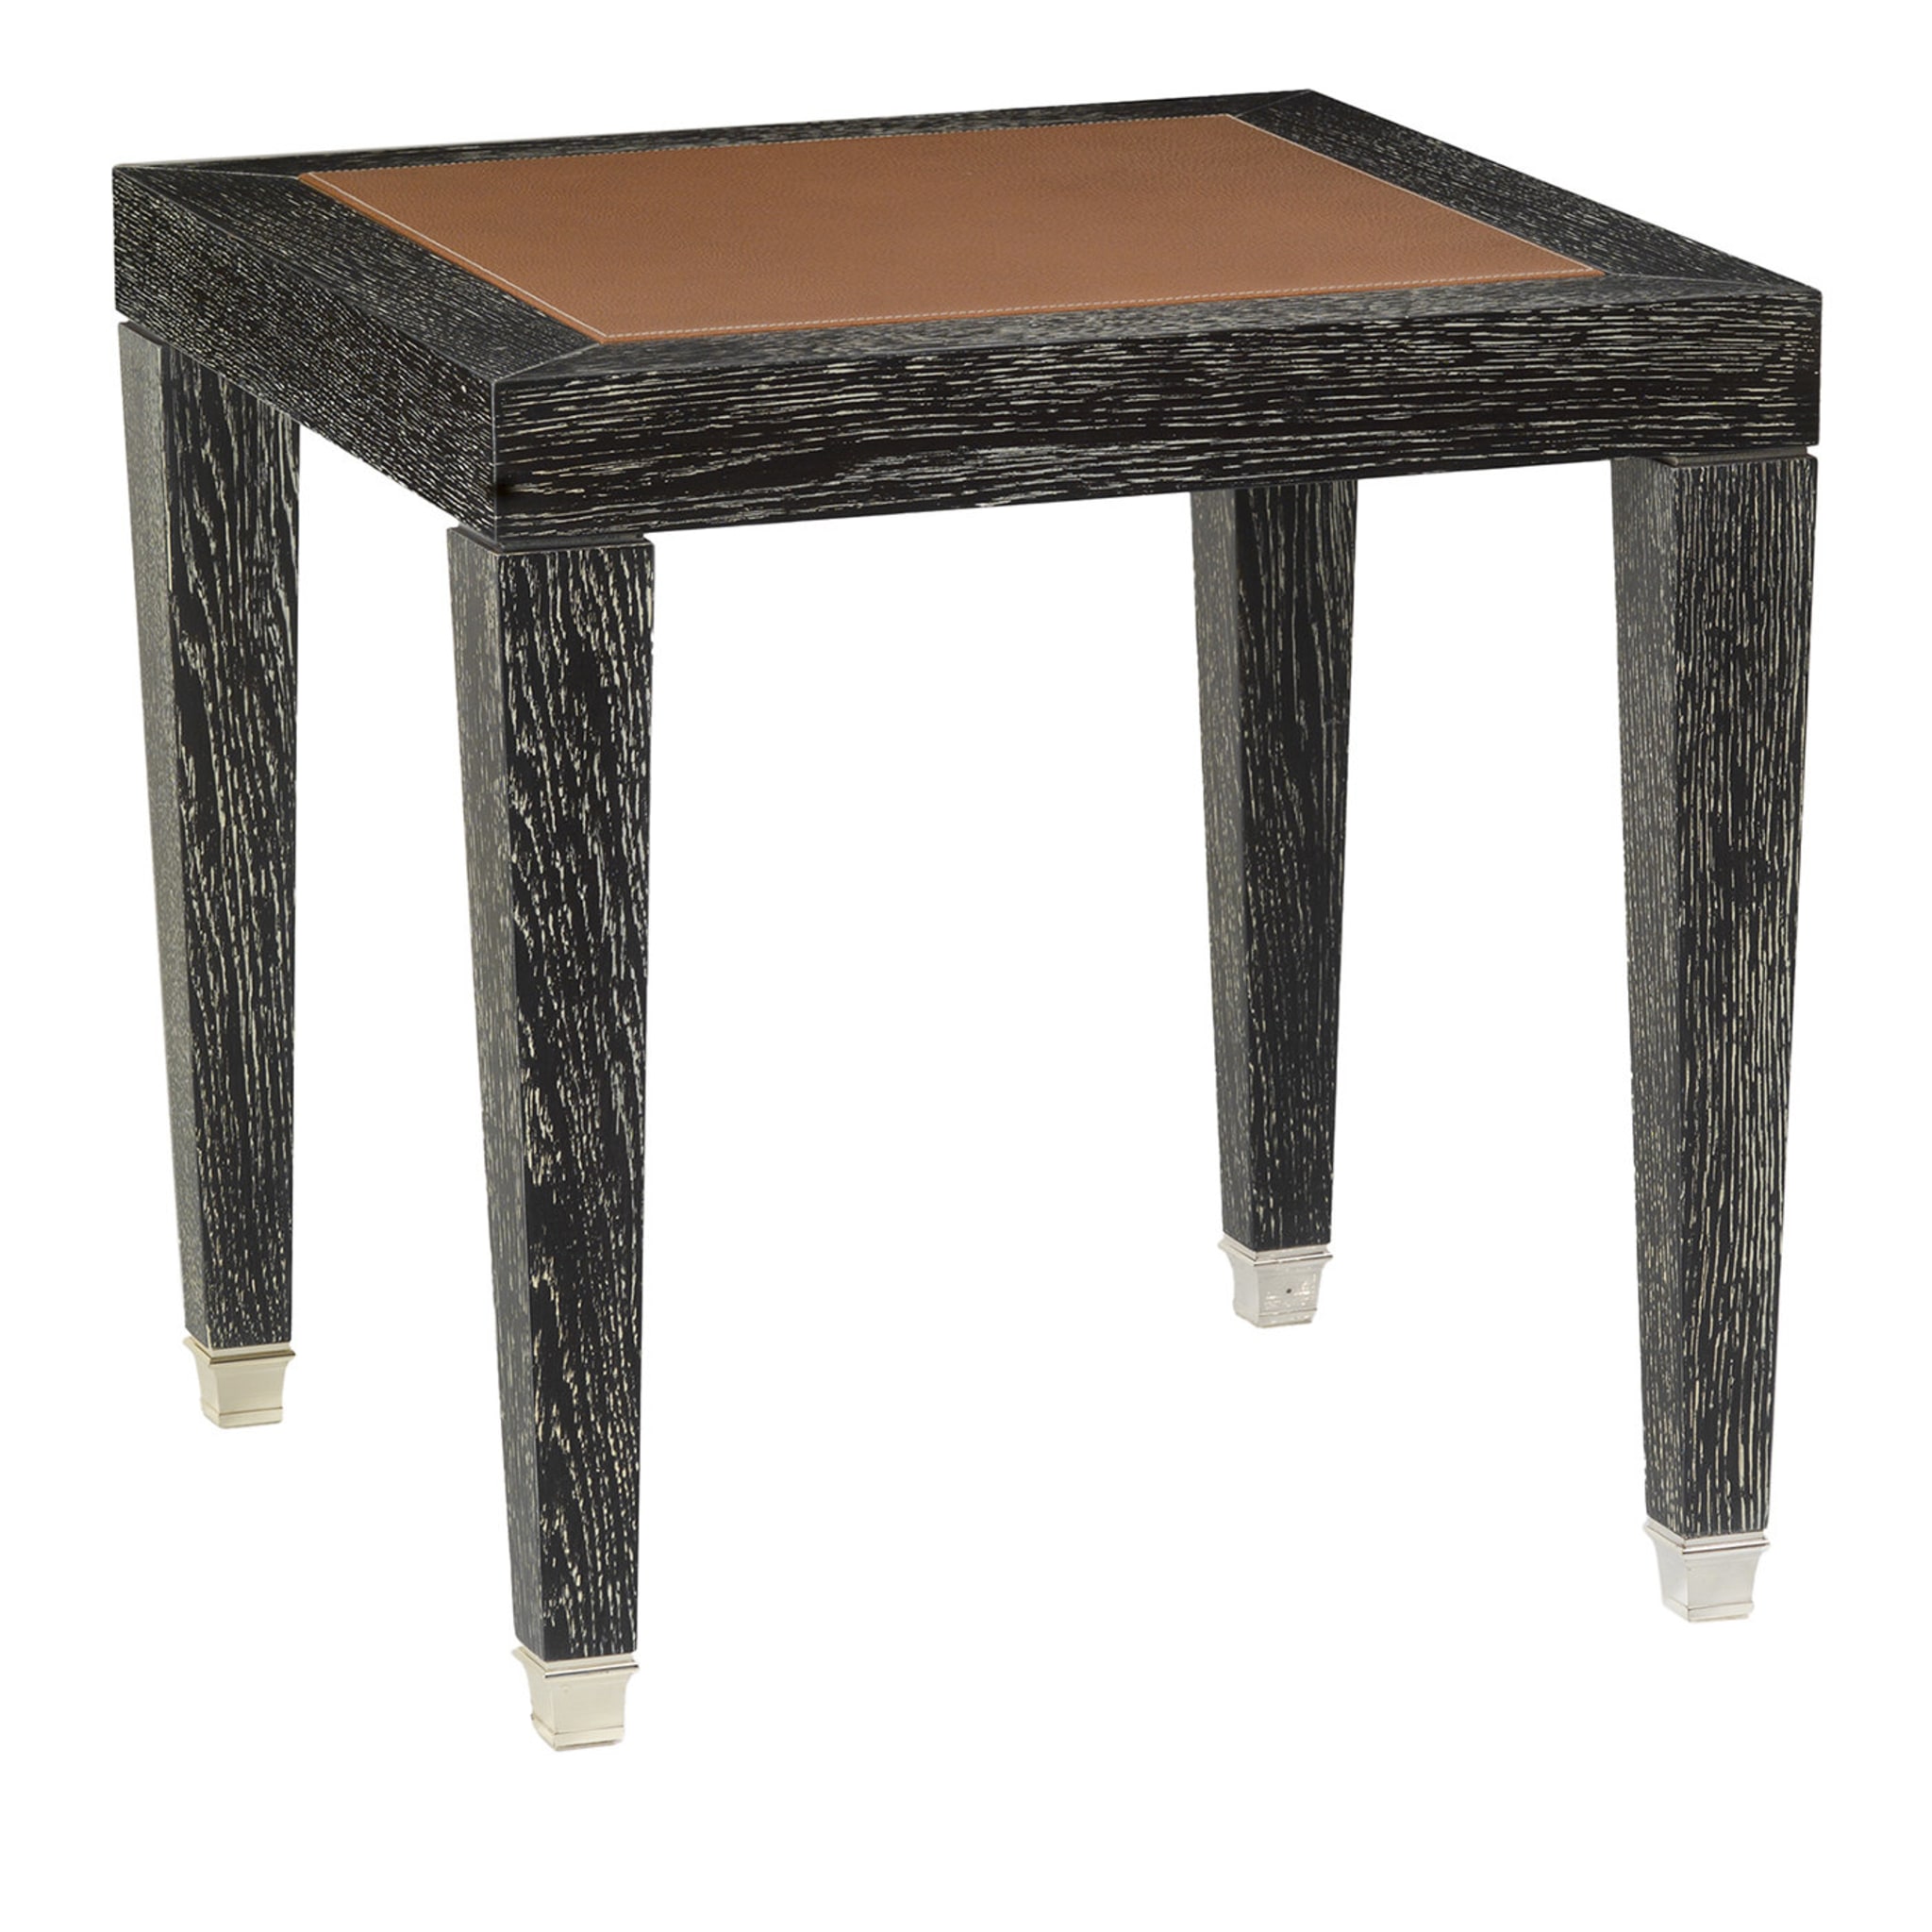 Square Side Table with Leather Top by Michele Bonan - Main view